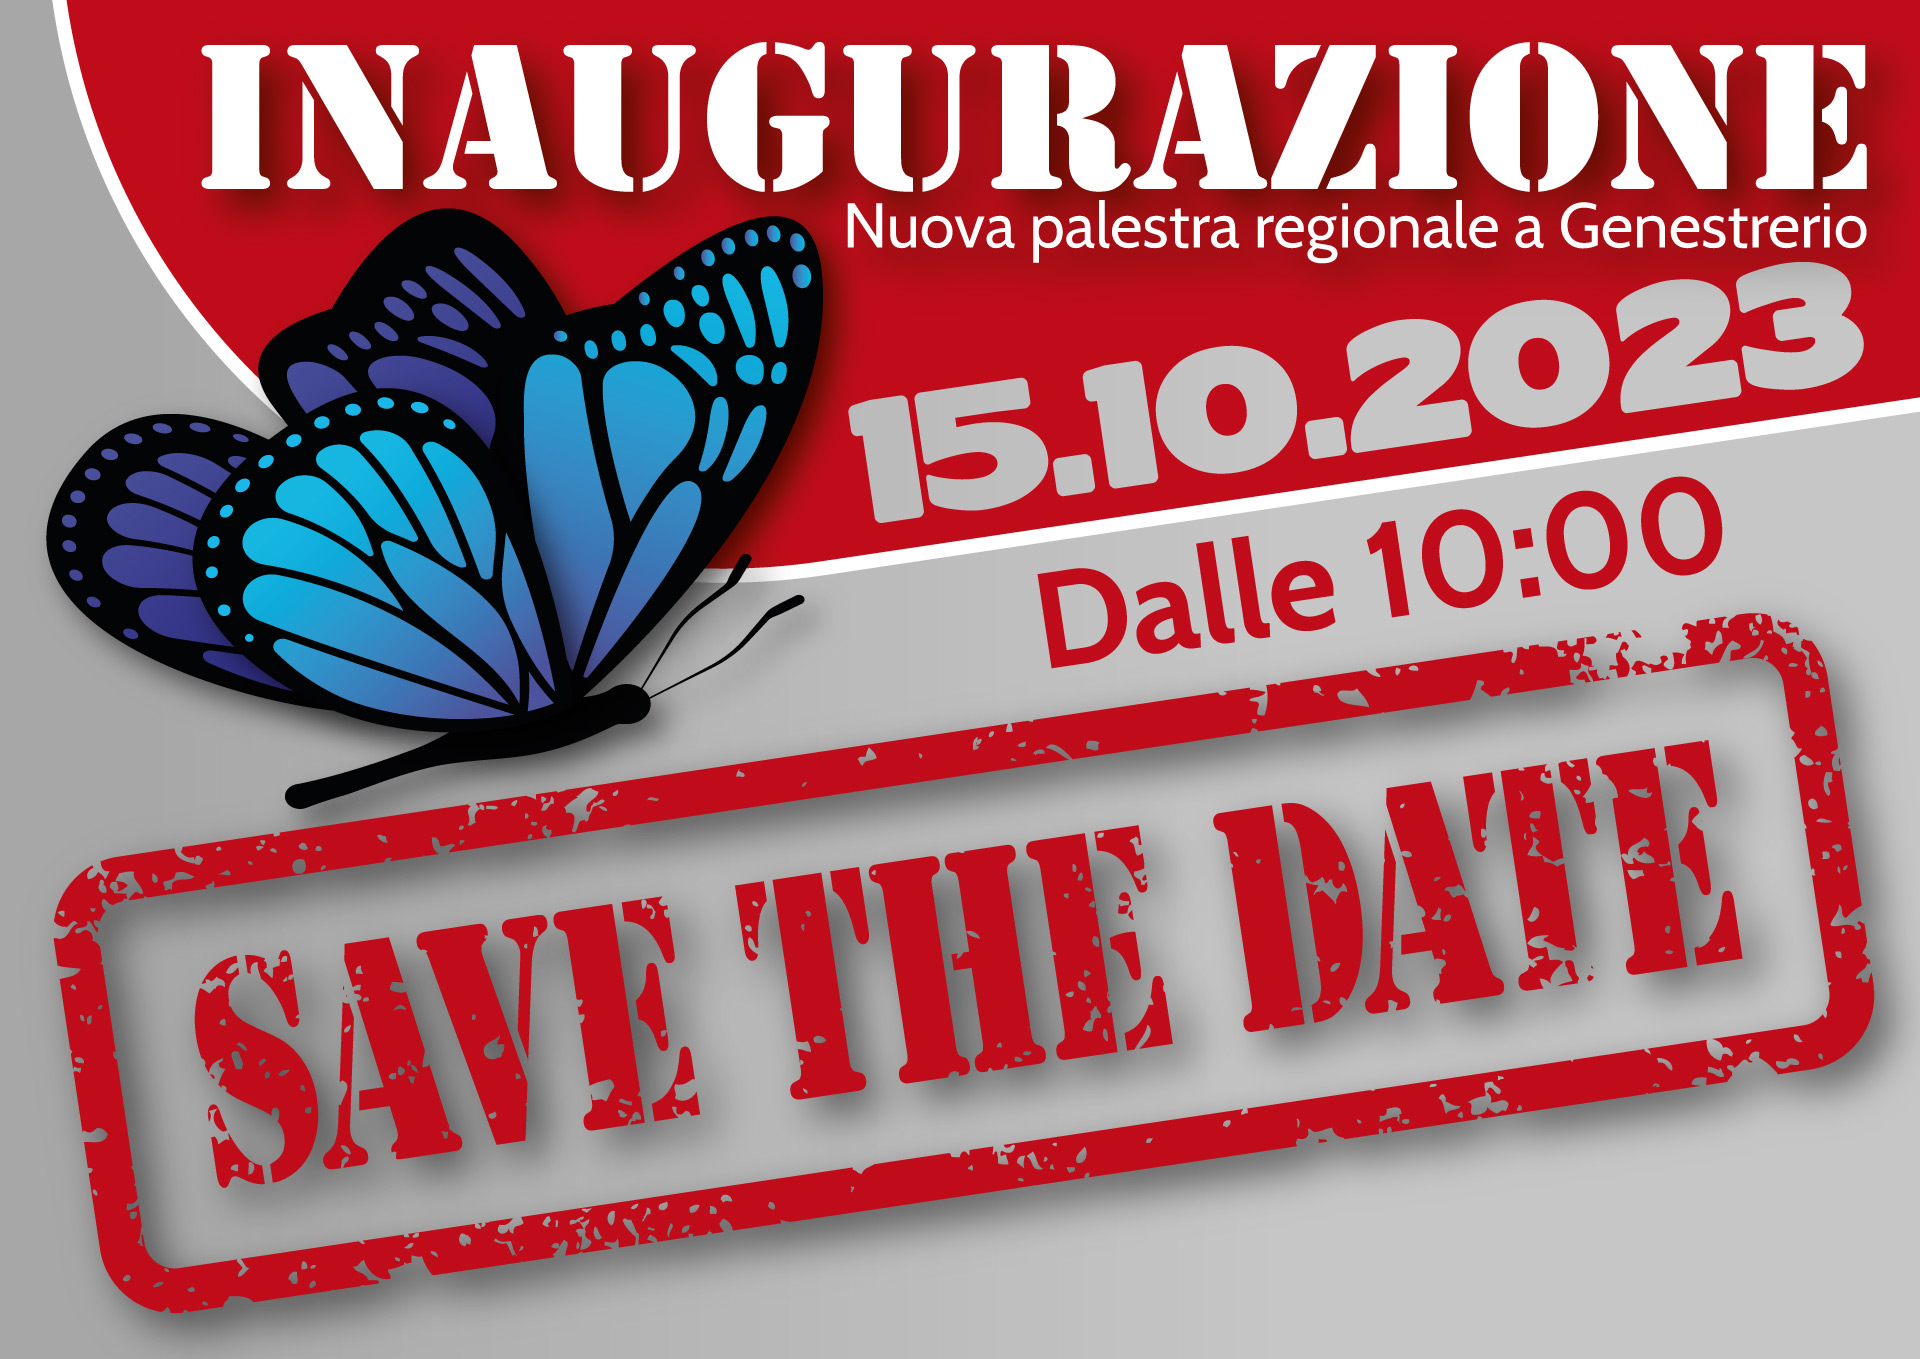 SportAcademy – SAVE THE DATE